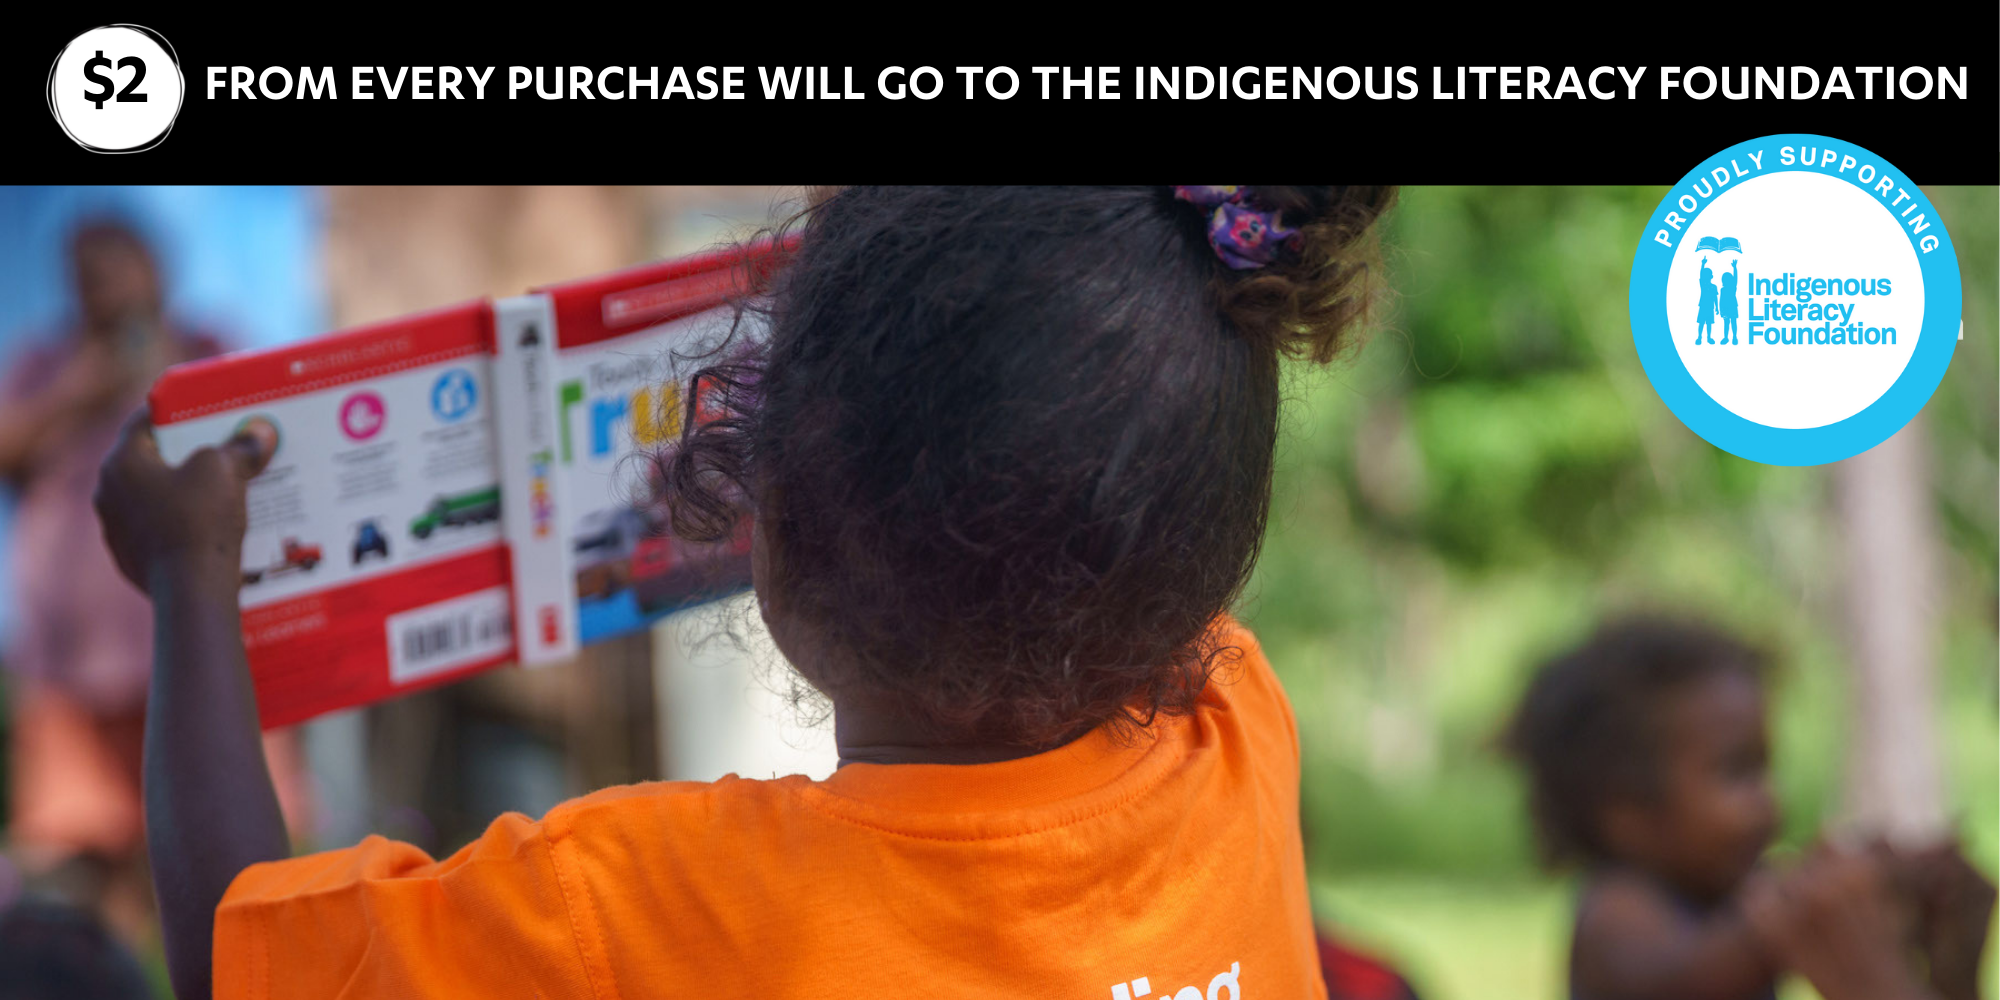 Donations to the Indigenous Literacy Foundation